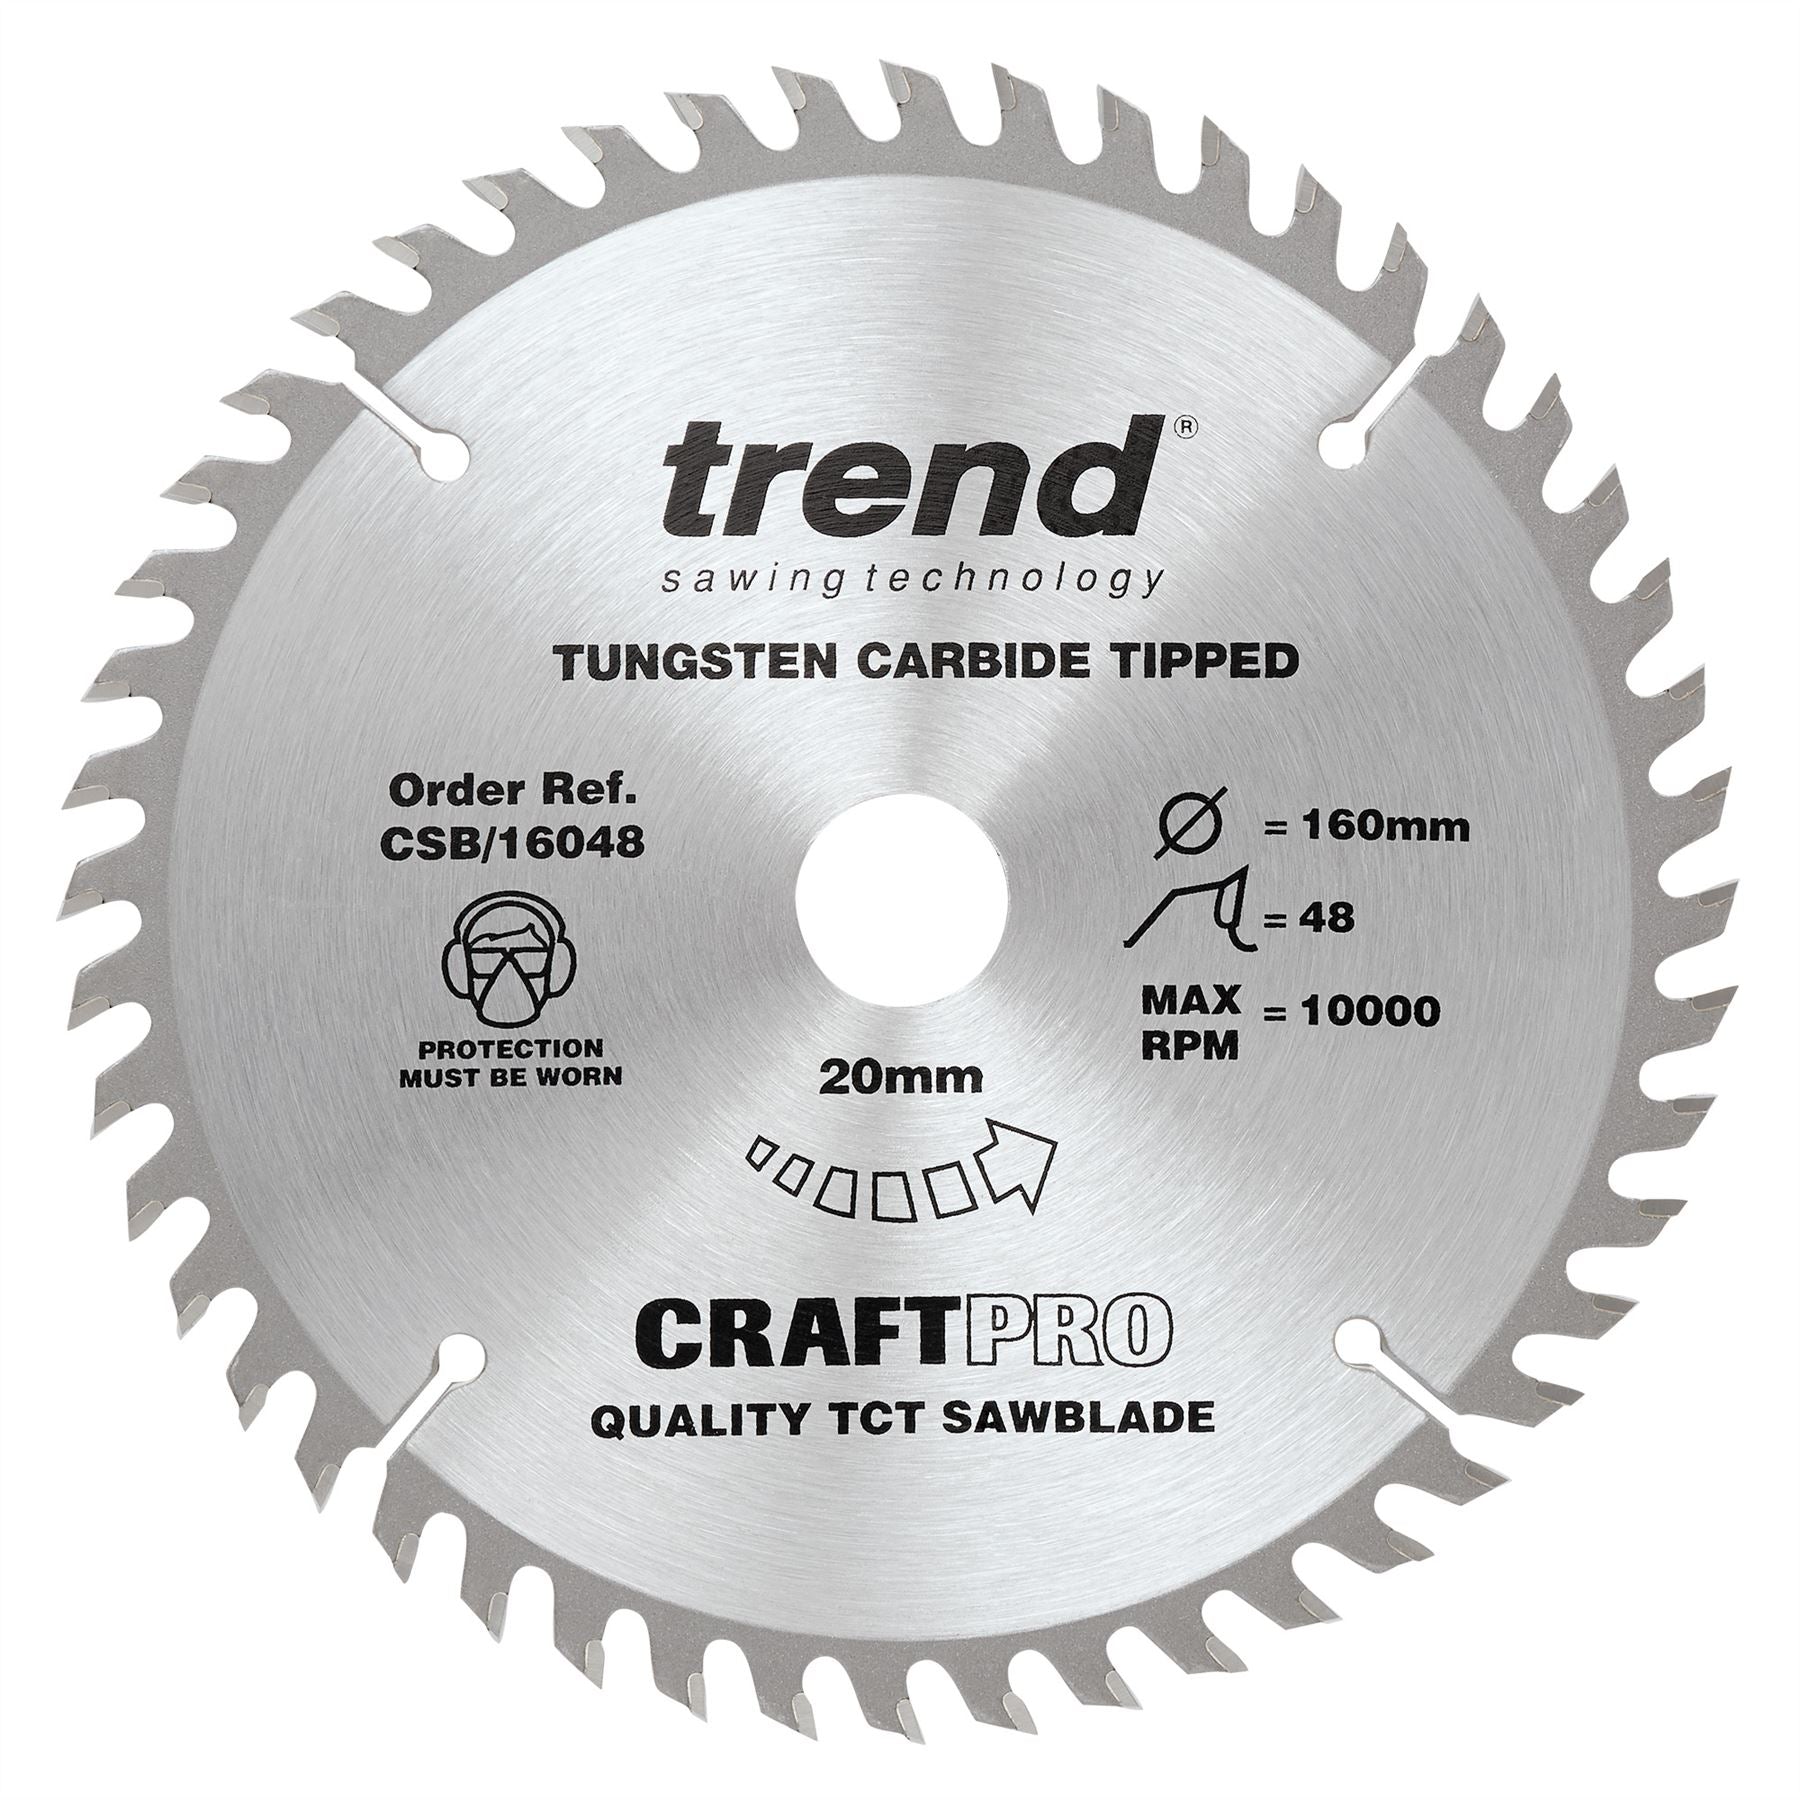 Trend The Craft Pro 160mm Diameter 20mm Bore 48 Tooth Fine Finish Cut Saw Blade For Hand Held Circular Saws CSB/16048